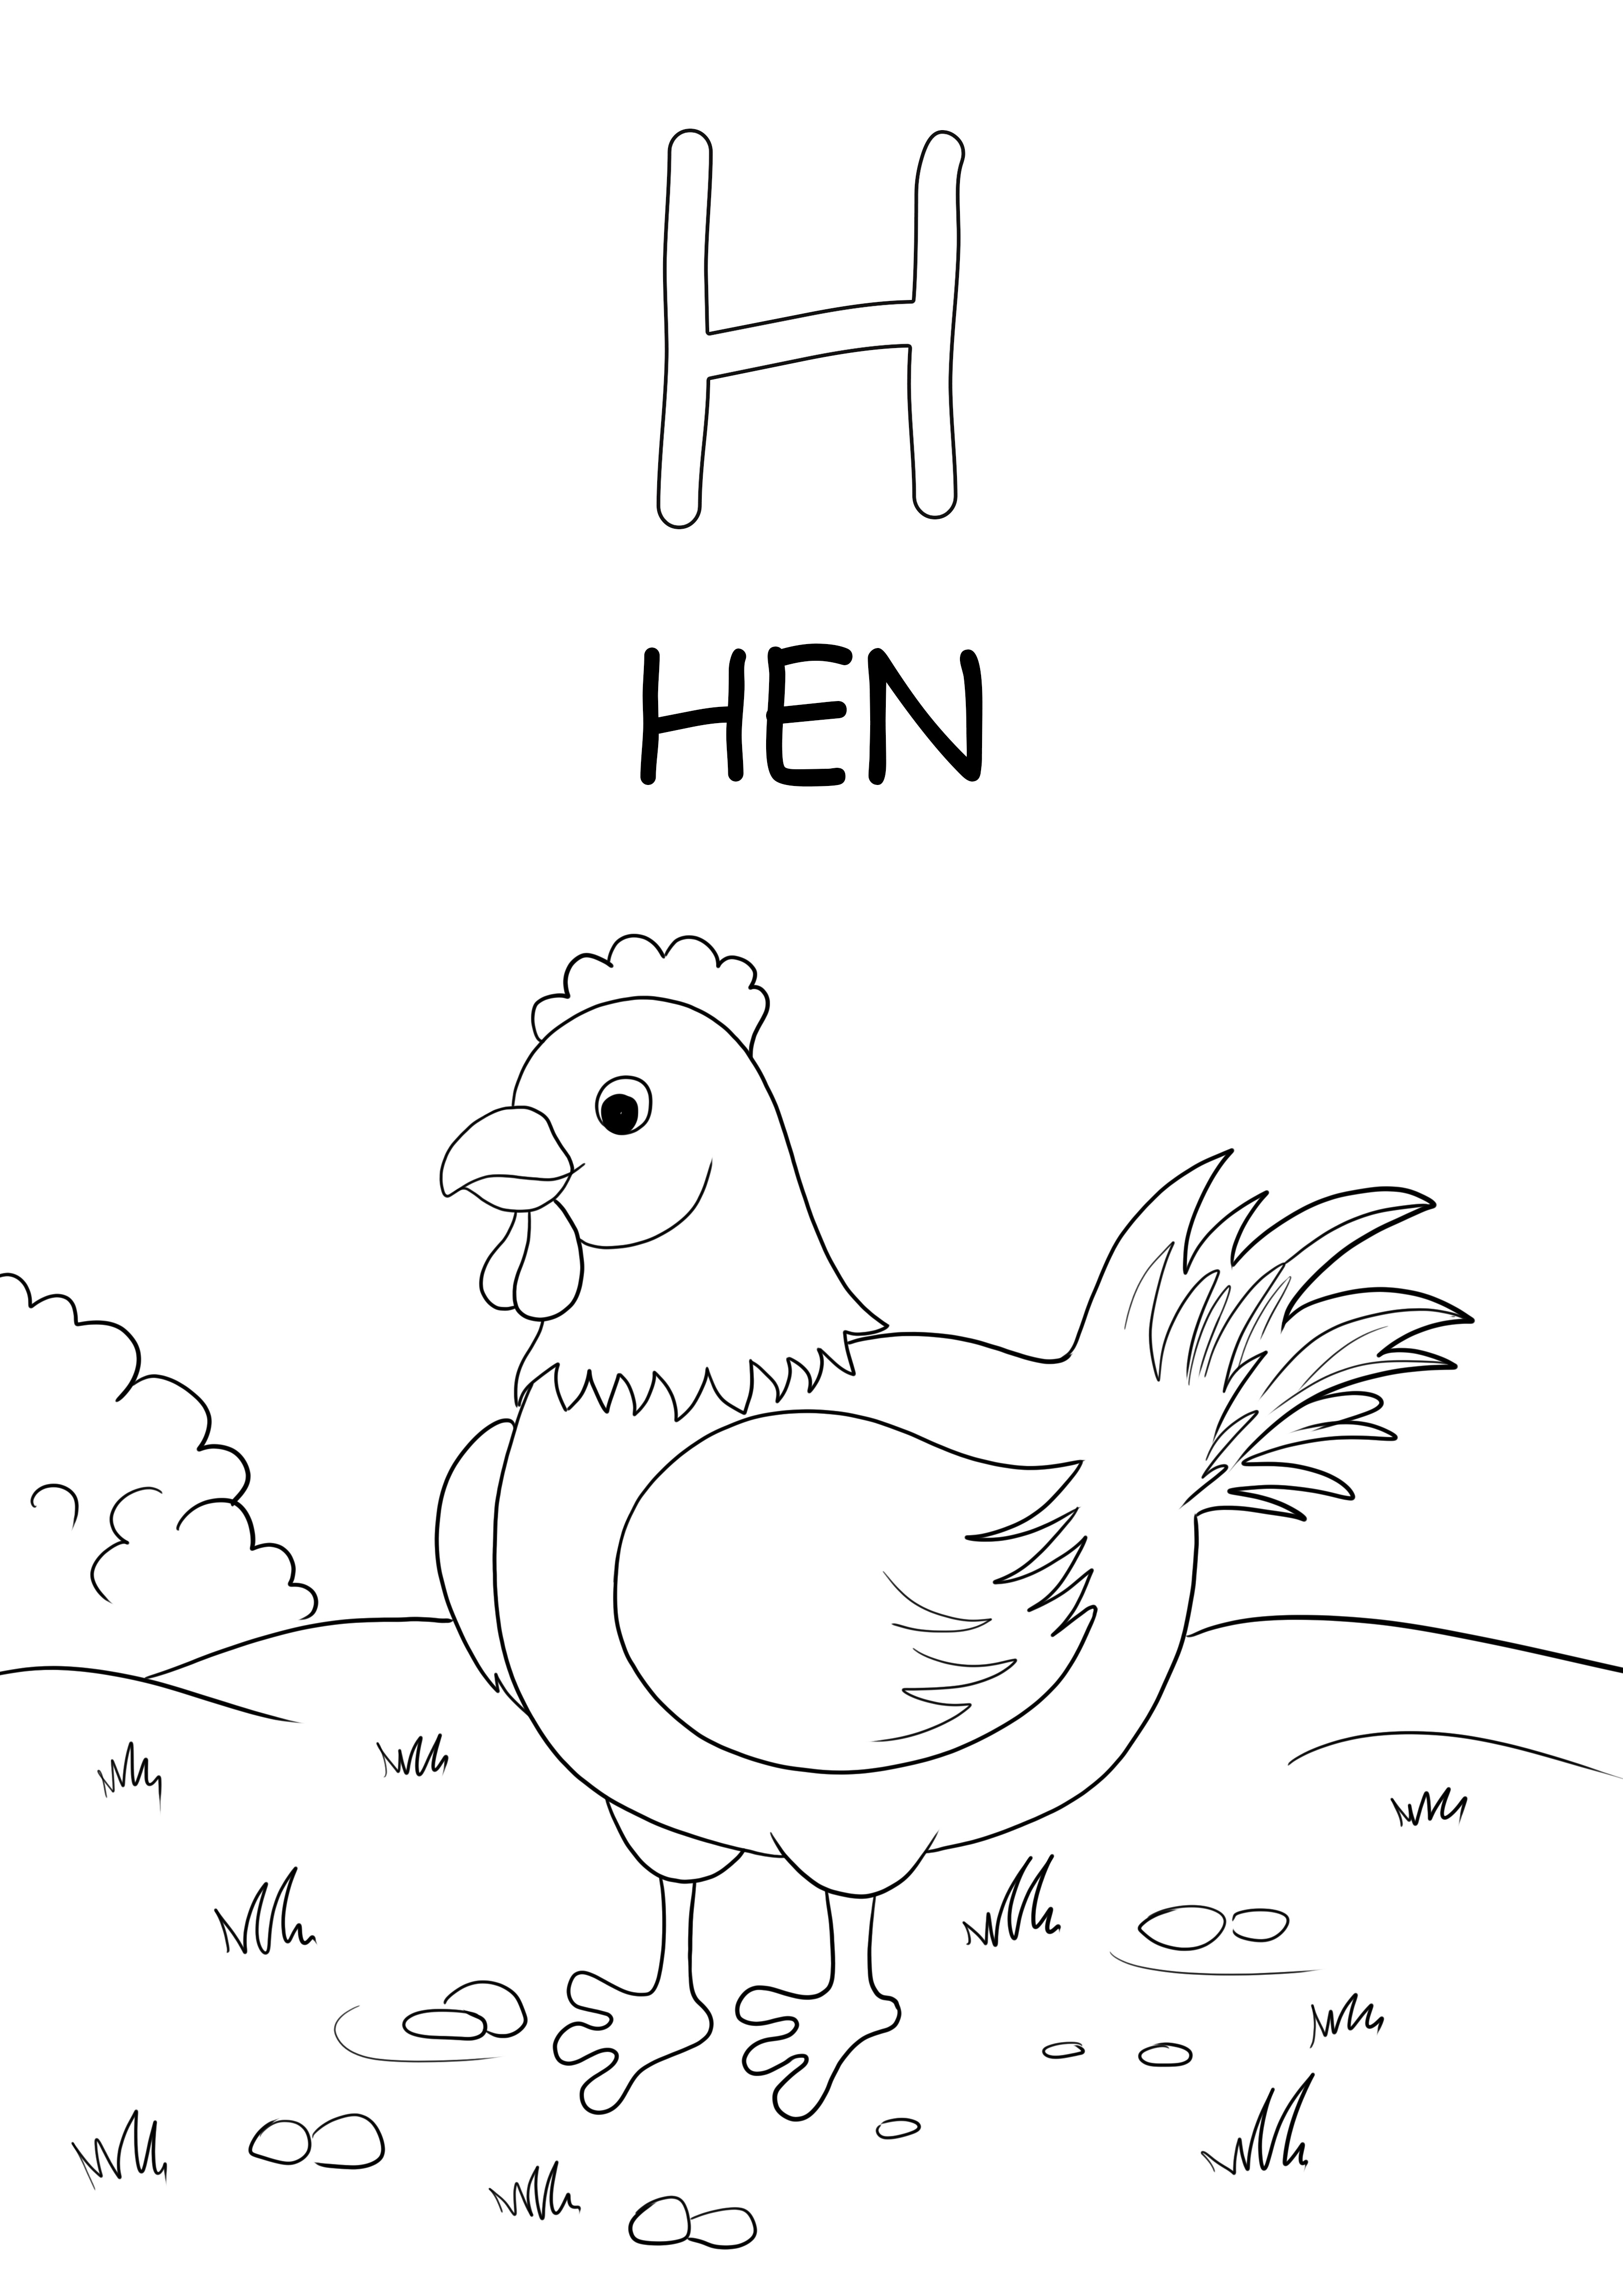 H is for HEN 塗り絵無料ダウンロード